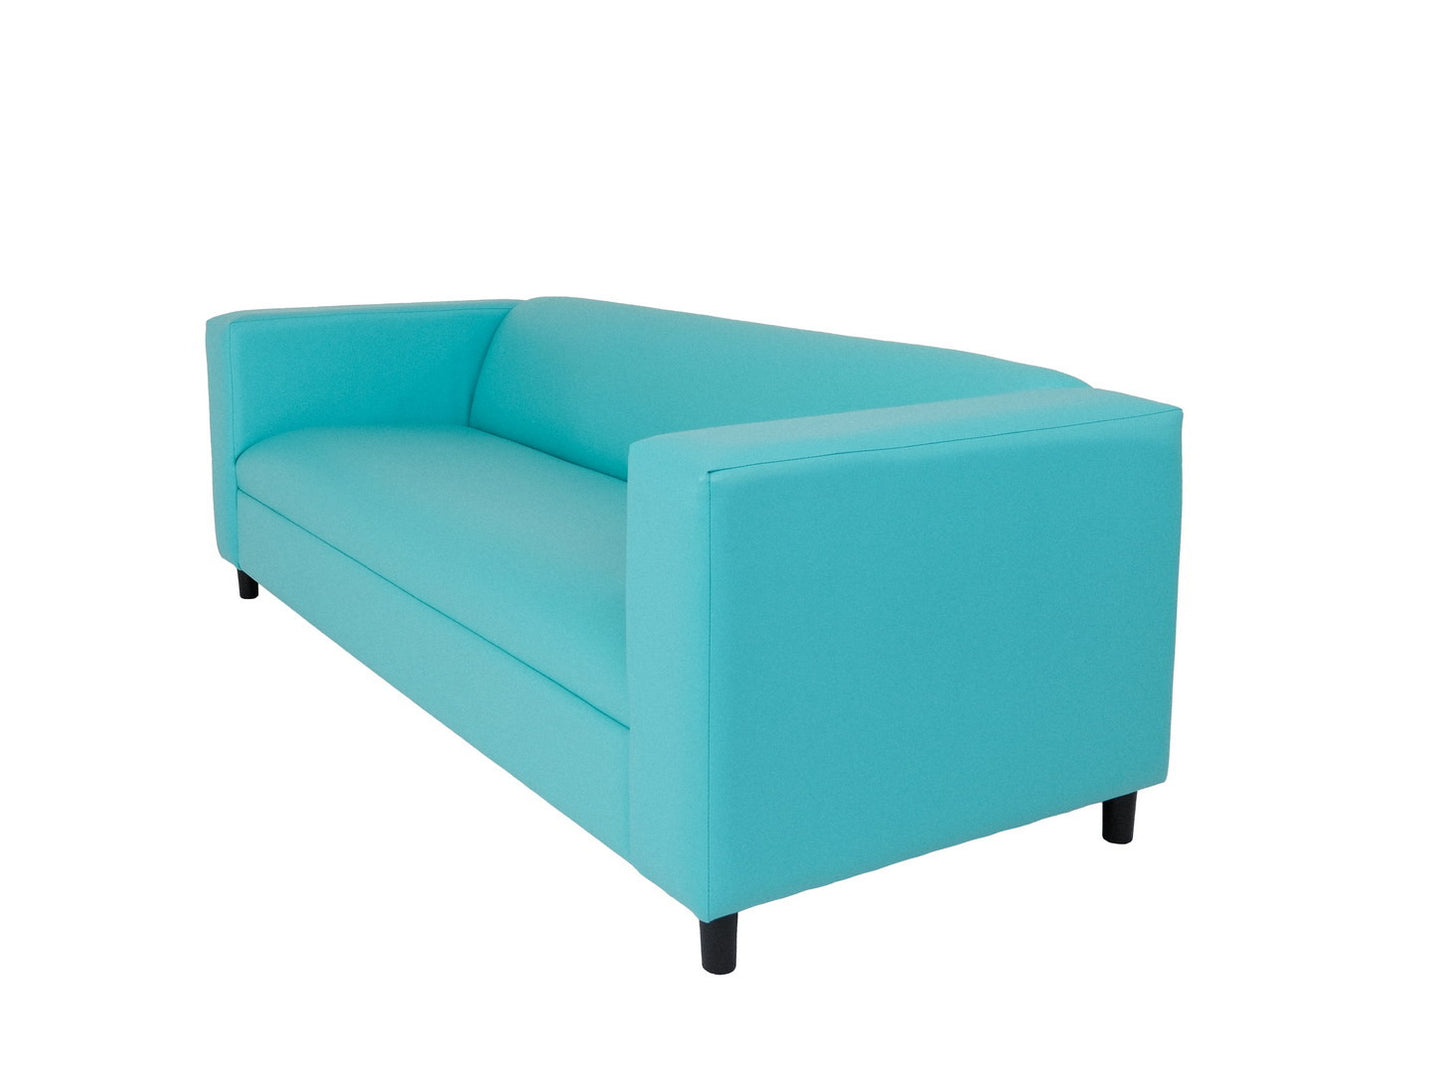 84" Teal Blue Faux Leather Sofa With Black Legs